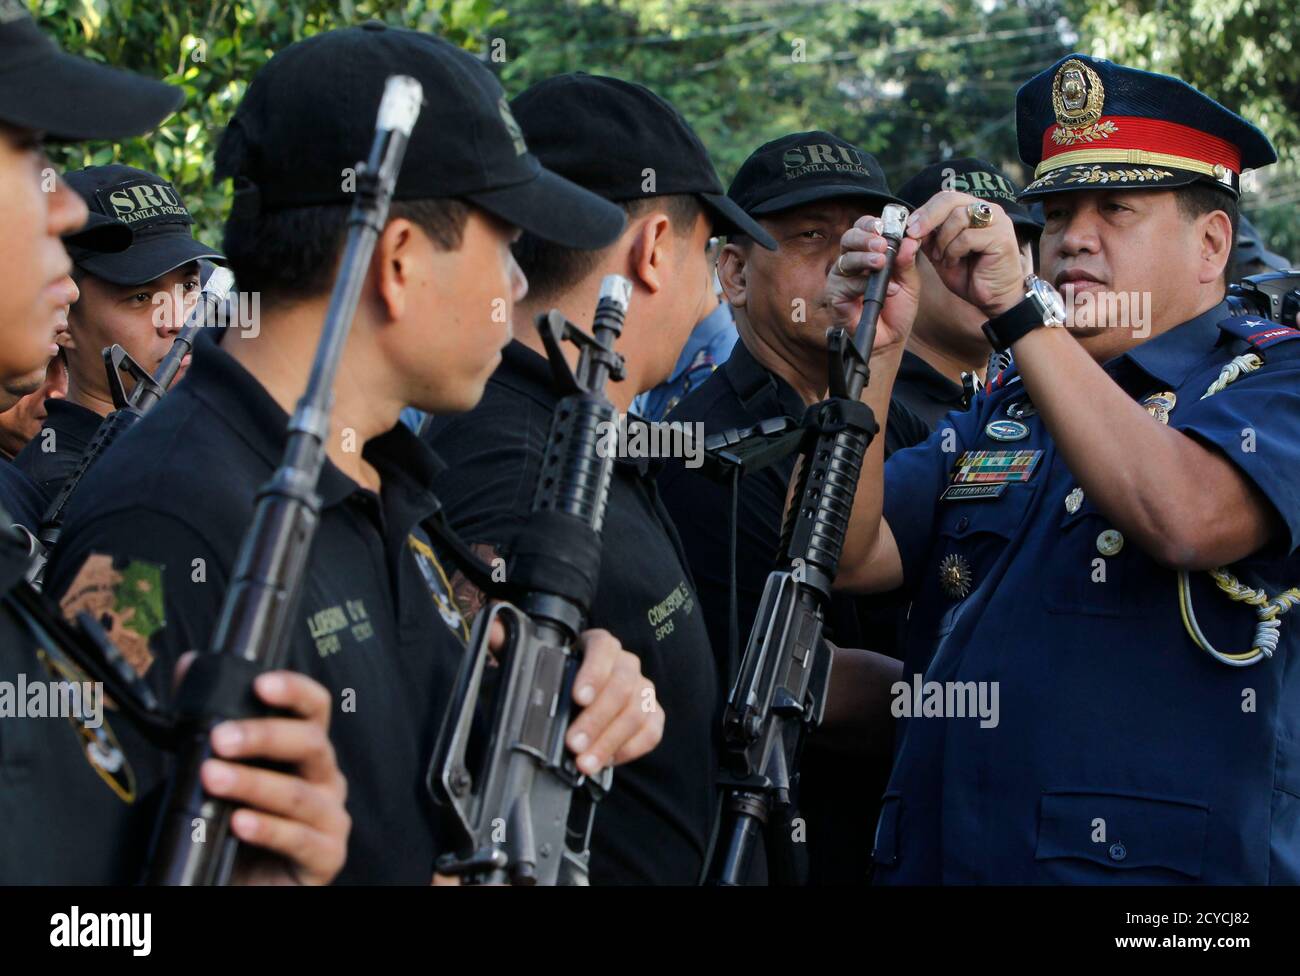 A Philippine National Police (PNP) officer removes tape as he unseals the muzzle of a service firearms of a member of the Special Weapons and Tactics (SWAT) team during the ceremonial unsealing of firearms at a police station in Manila January 2, 2013. The Department of Health (DOH) on Tuesday reported that 413 people were injured during New Year day celebrations in the Philippines - 405 were firework-related injuries, one of which was a case of firecracker ingestion. The remaining eight were wounded by stray bullets, with one victim dead. Police are investigating the cases of victims of the s Stock Photo